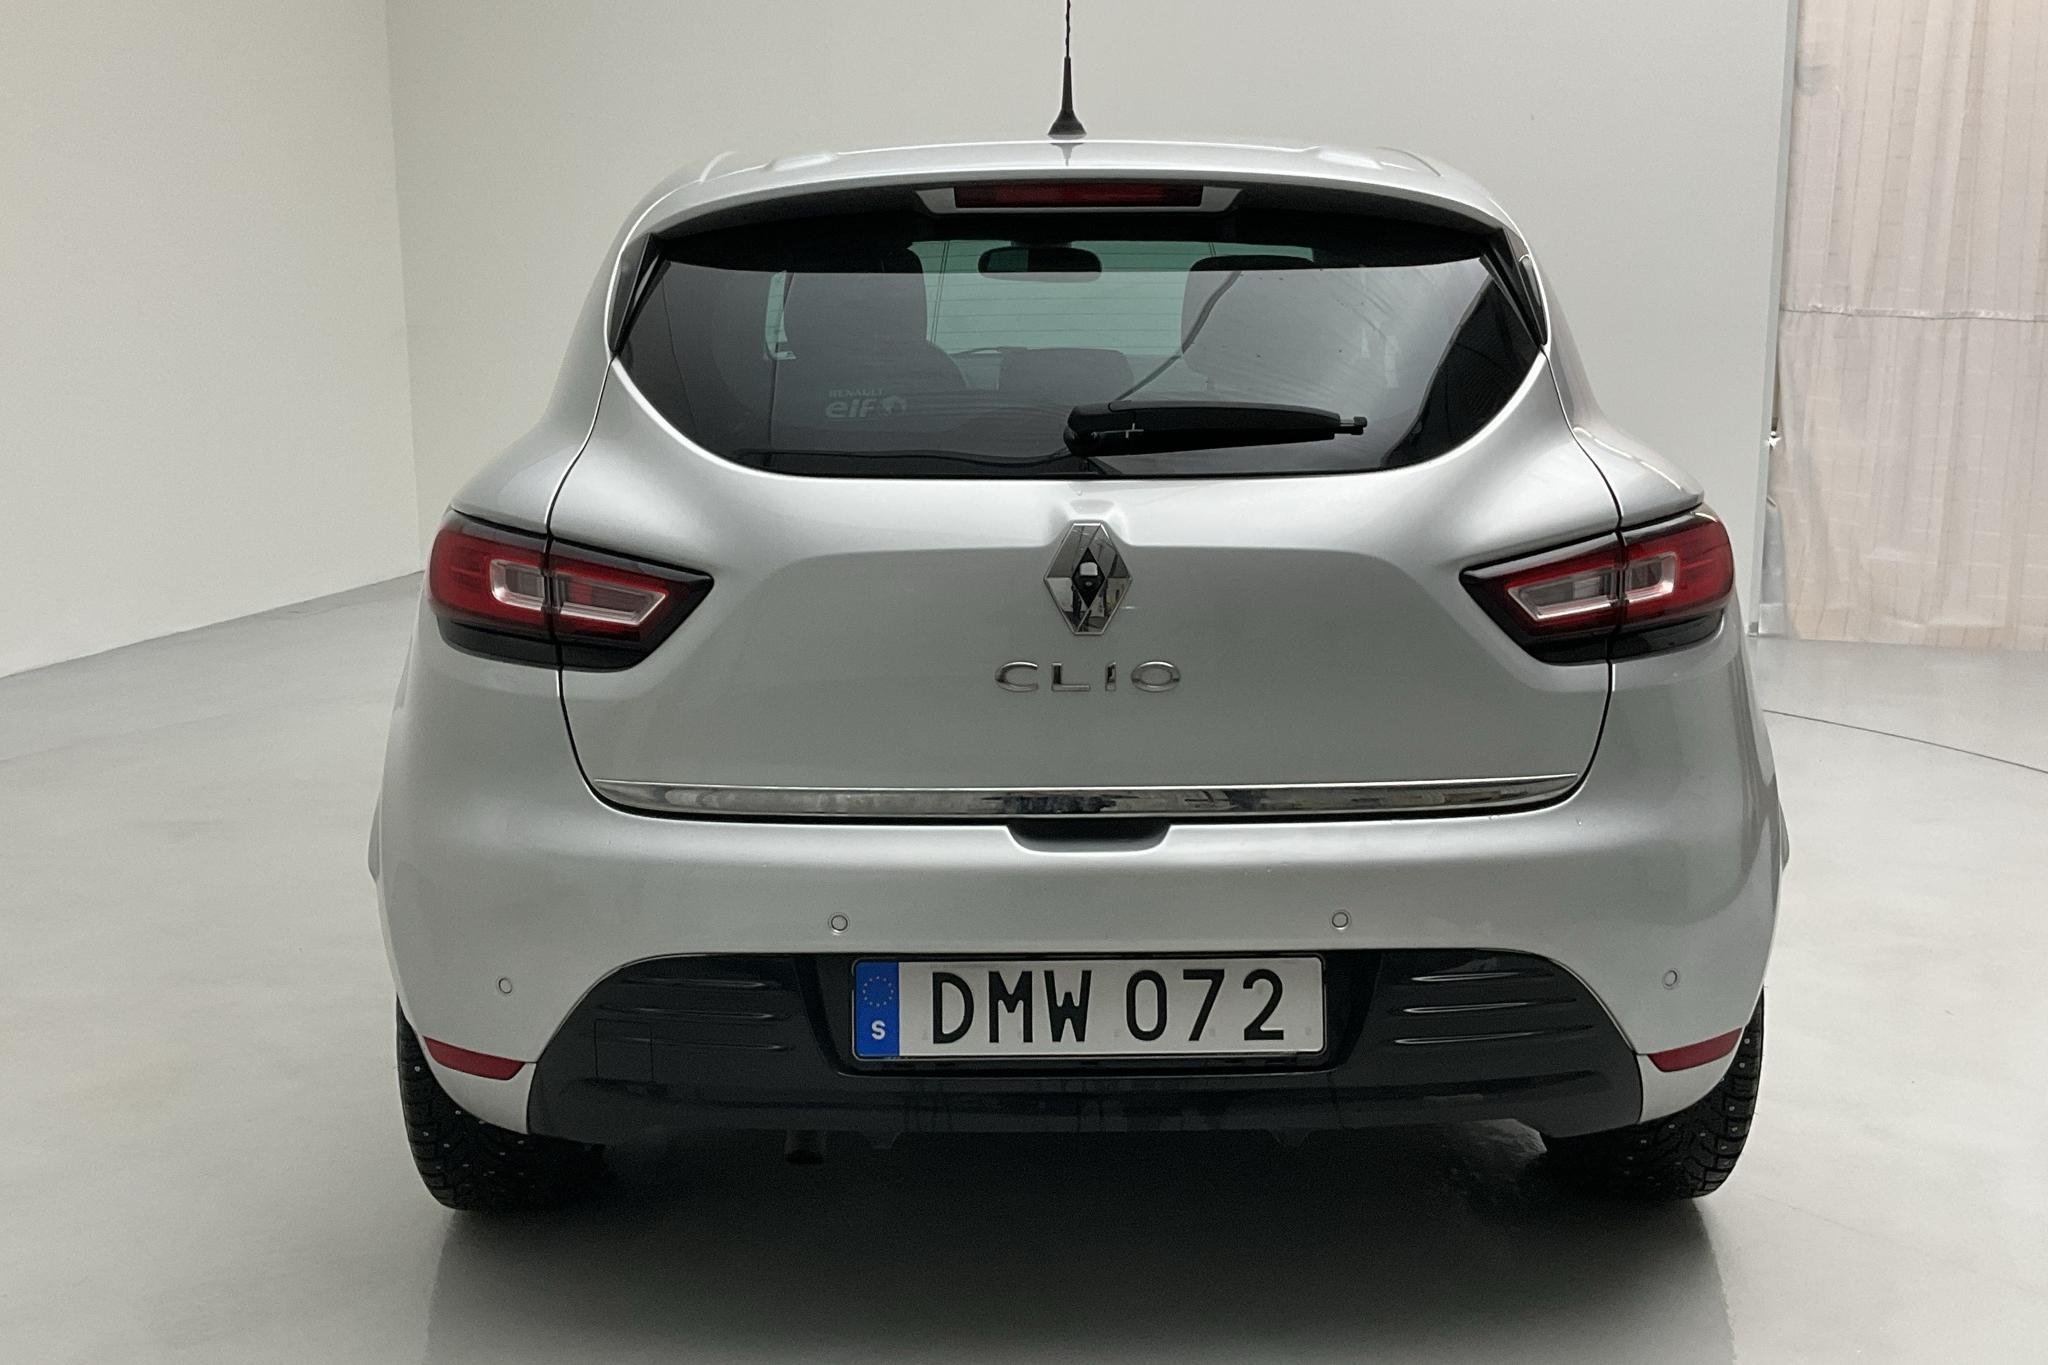 Renault Clio IV 0.9 TCe 90 5dr (90hk) - 6 508 mil - Manuell - silver - 2018